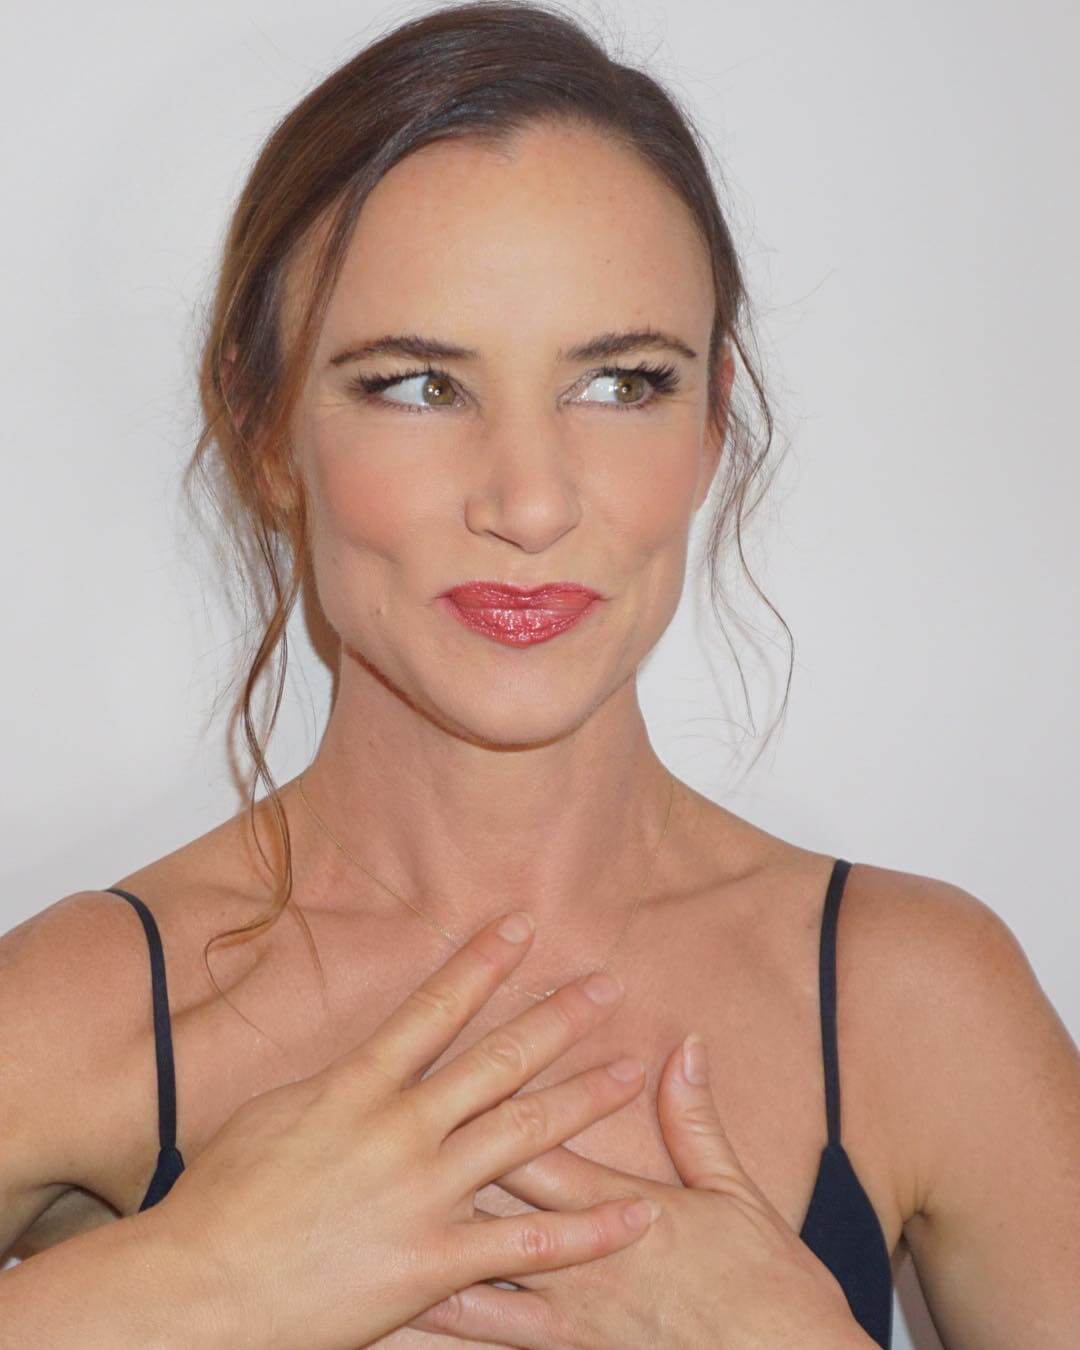 Hot Picture Of Juliette Lewis Are Just Way Too Hot. Best Of